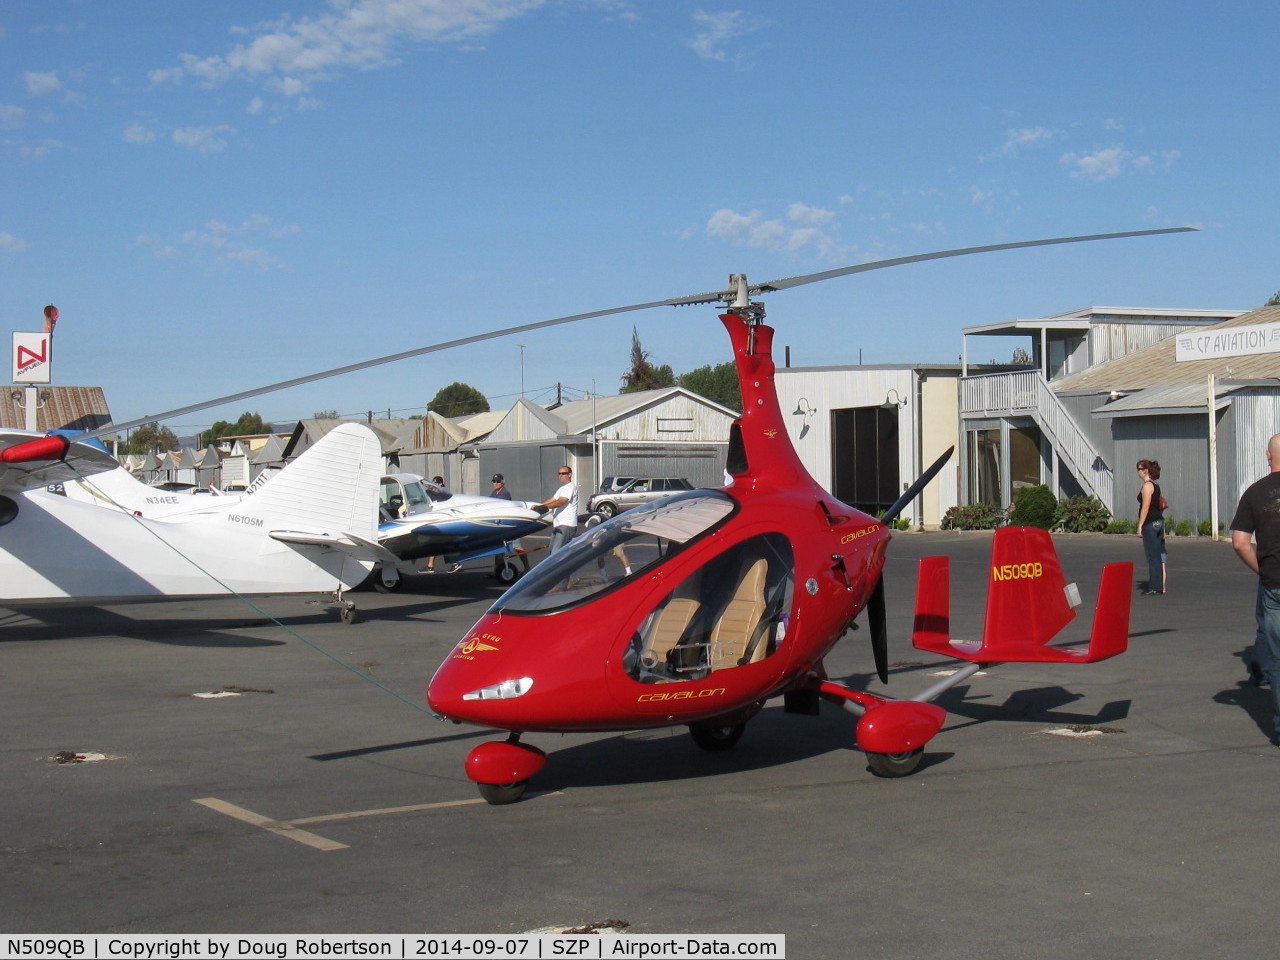 N509QB, 2014 AutoGyro Cavalon C/N V00138, 2014 Burton Autogyro Gmbh CAVALON, Rotax 914UL Turbocharged 93.3 Hp, 3 blade pusher fixed-pitch prop, two-blade extruded aluminum rotor, tri-gear, two place, kit-built from Germany.